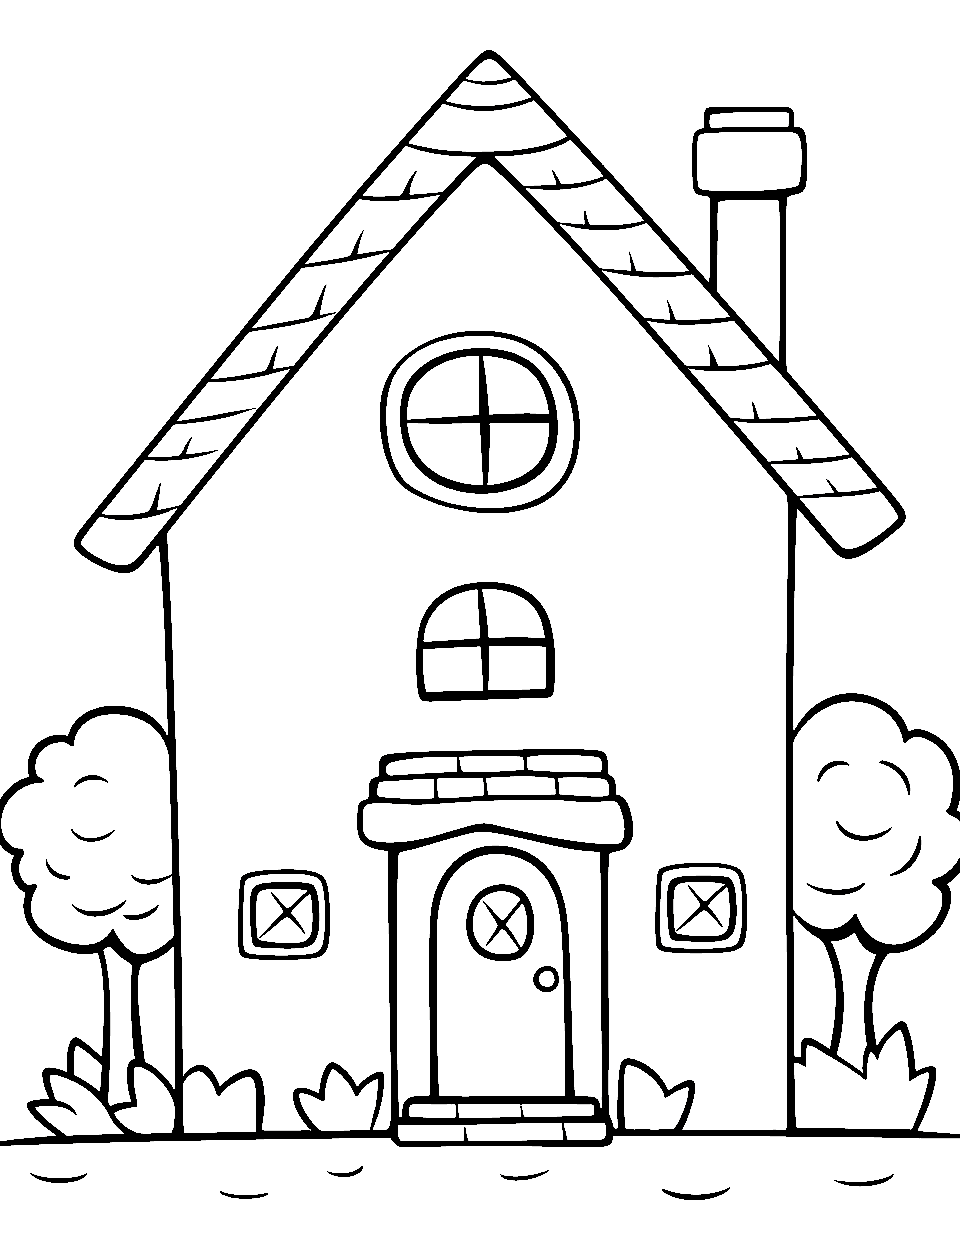 Math - ColorfulFam: Free & Premium Coloring Pages for the Whole Family